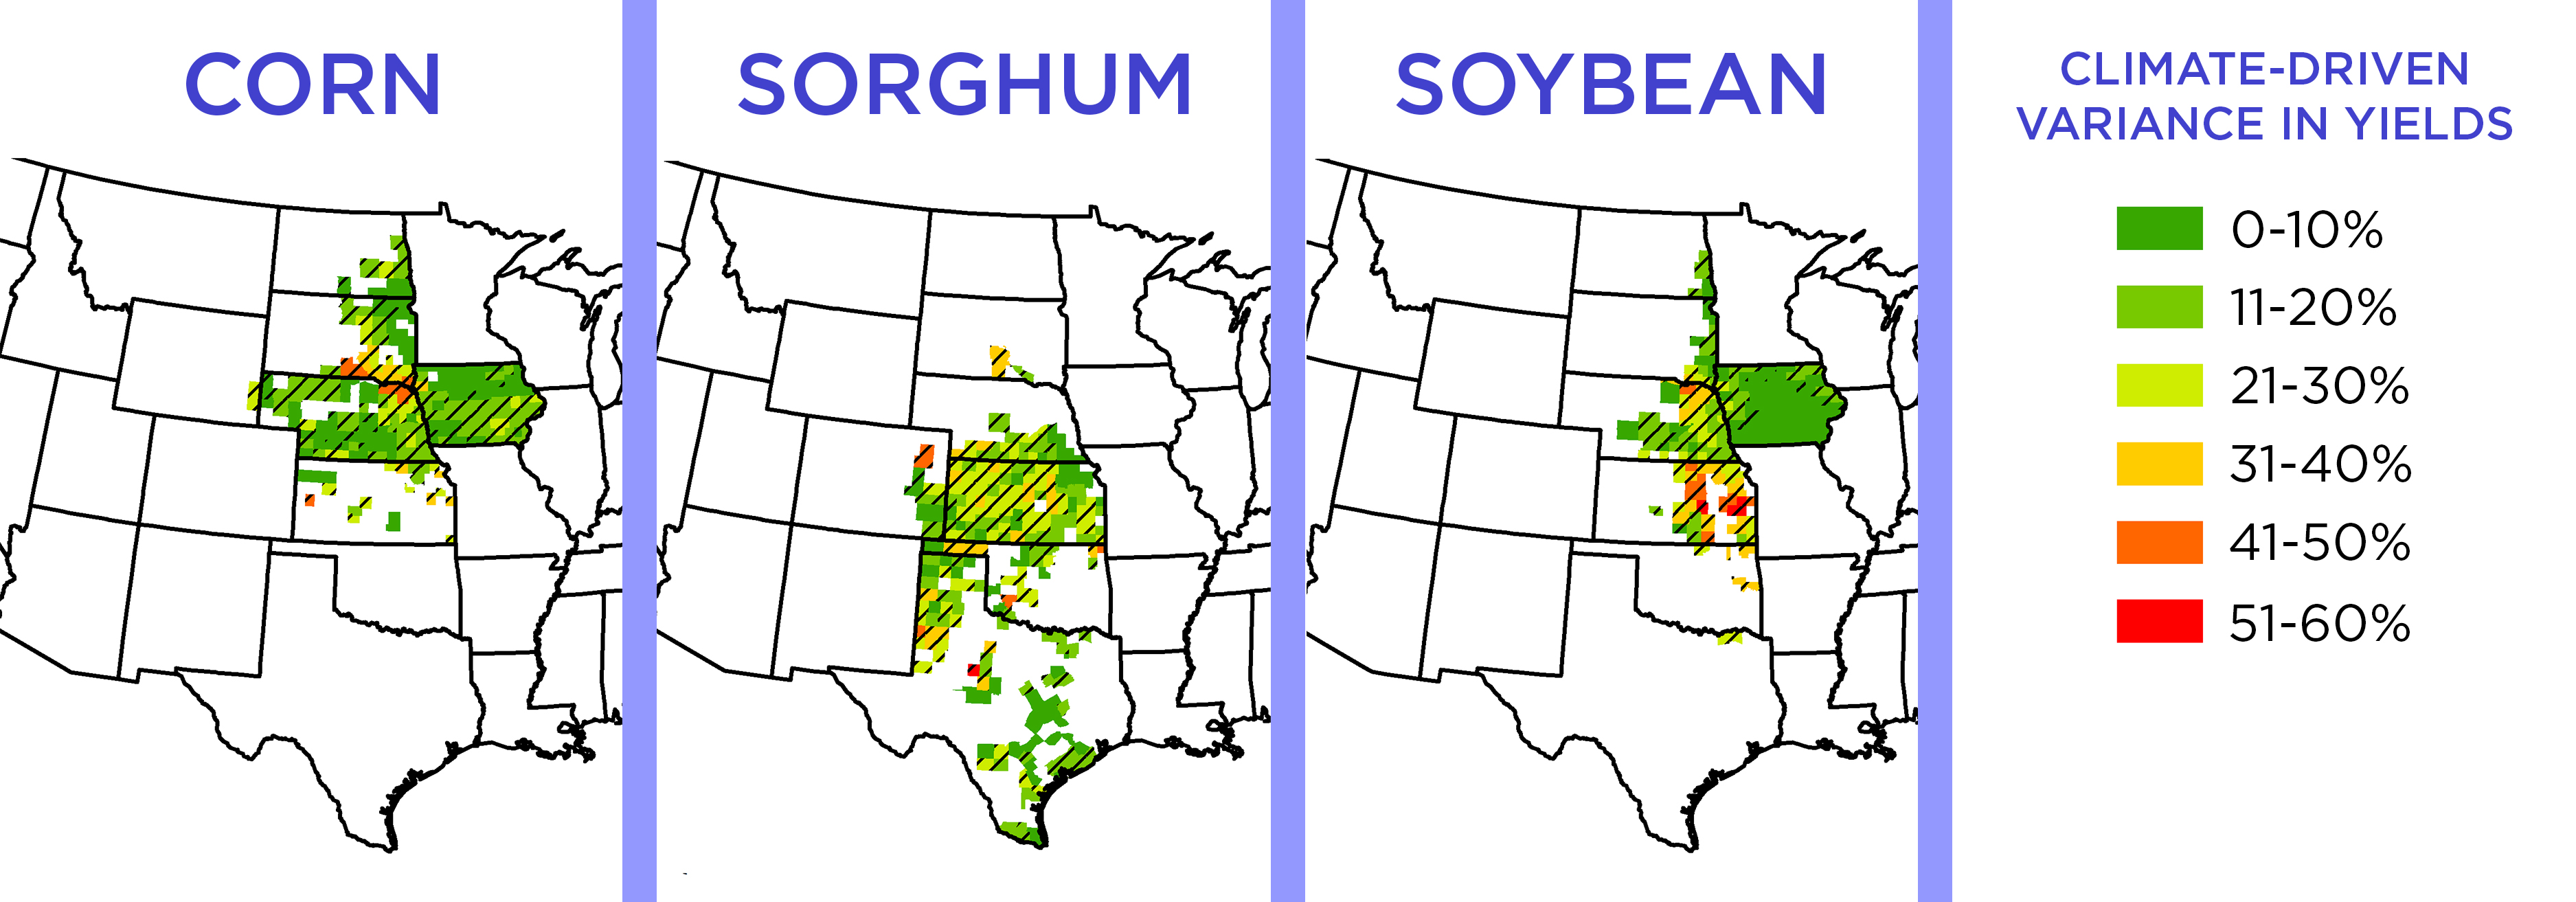 Maps showing how much of the variance in corn, sorghum and soybean yields were due to shifts in temperature and precipitation between 1968 and 2013.